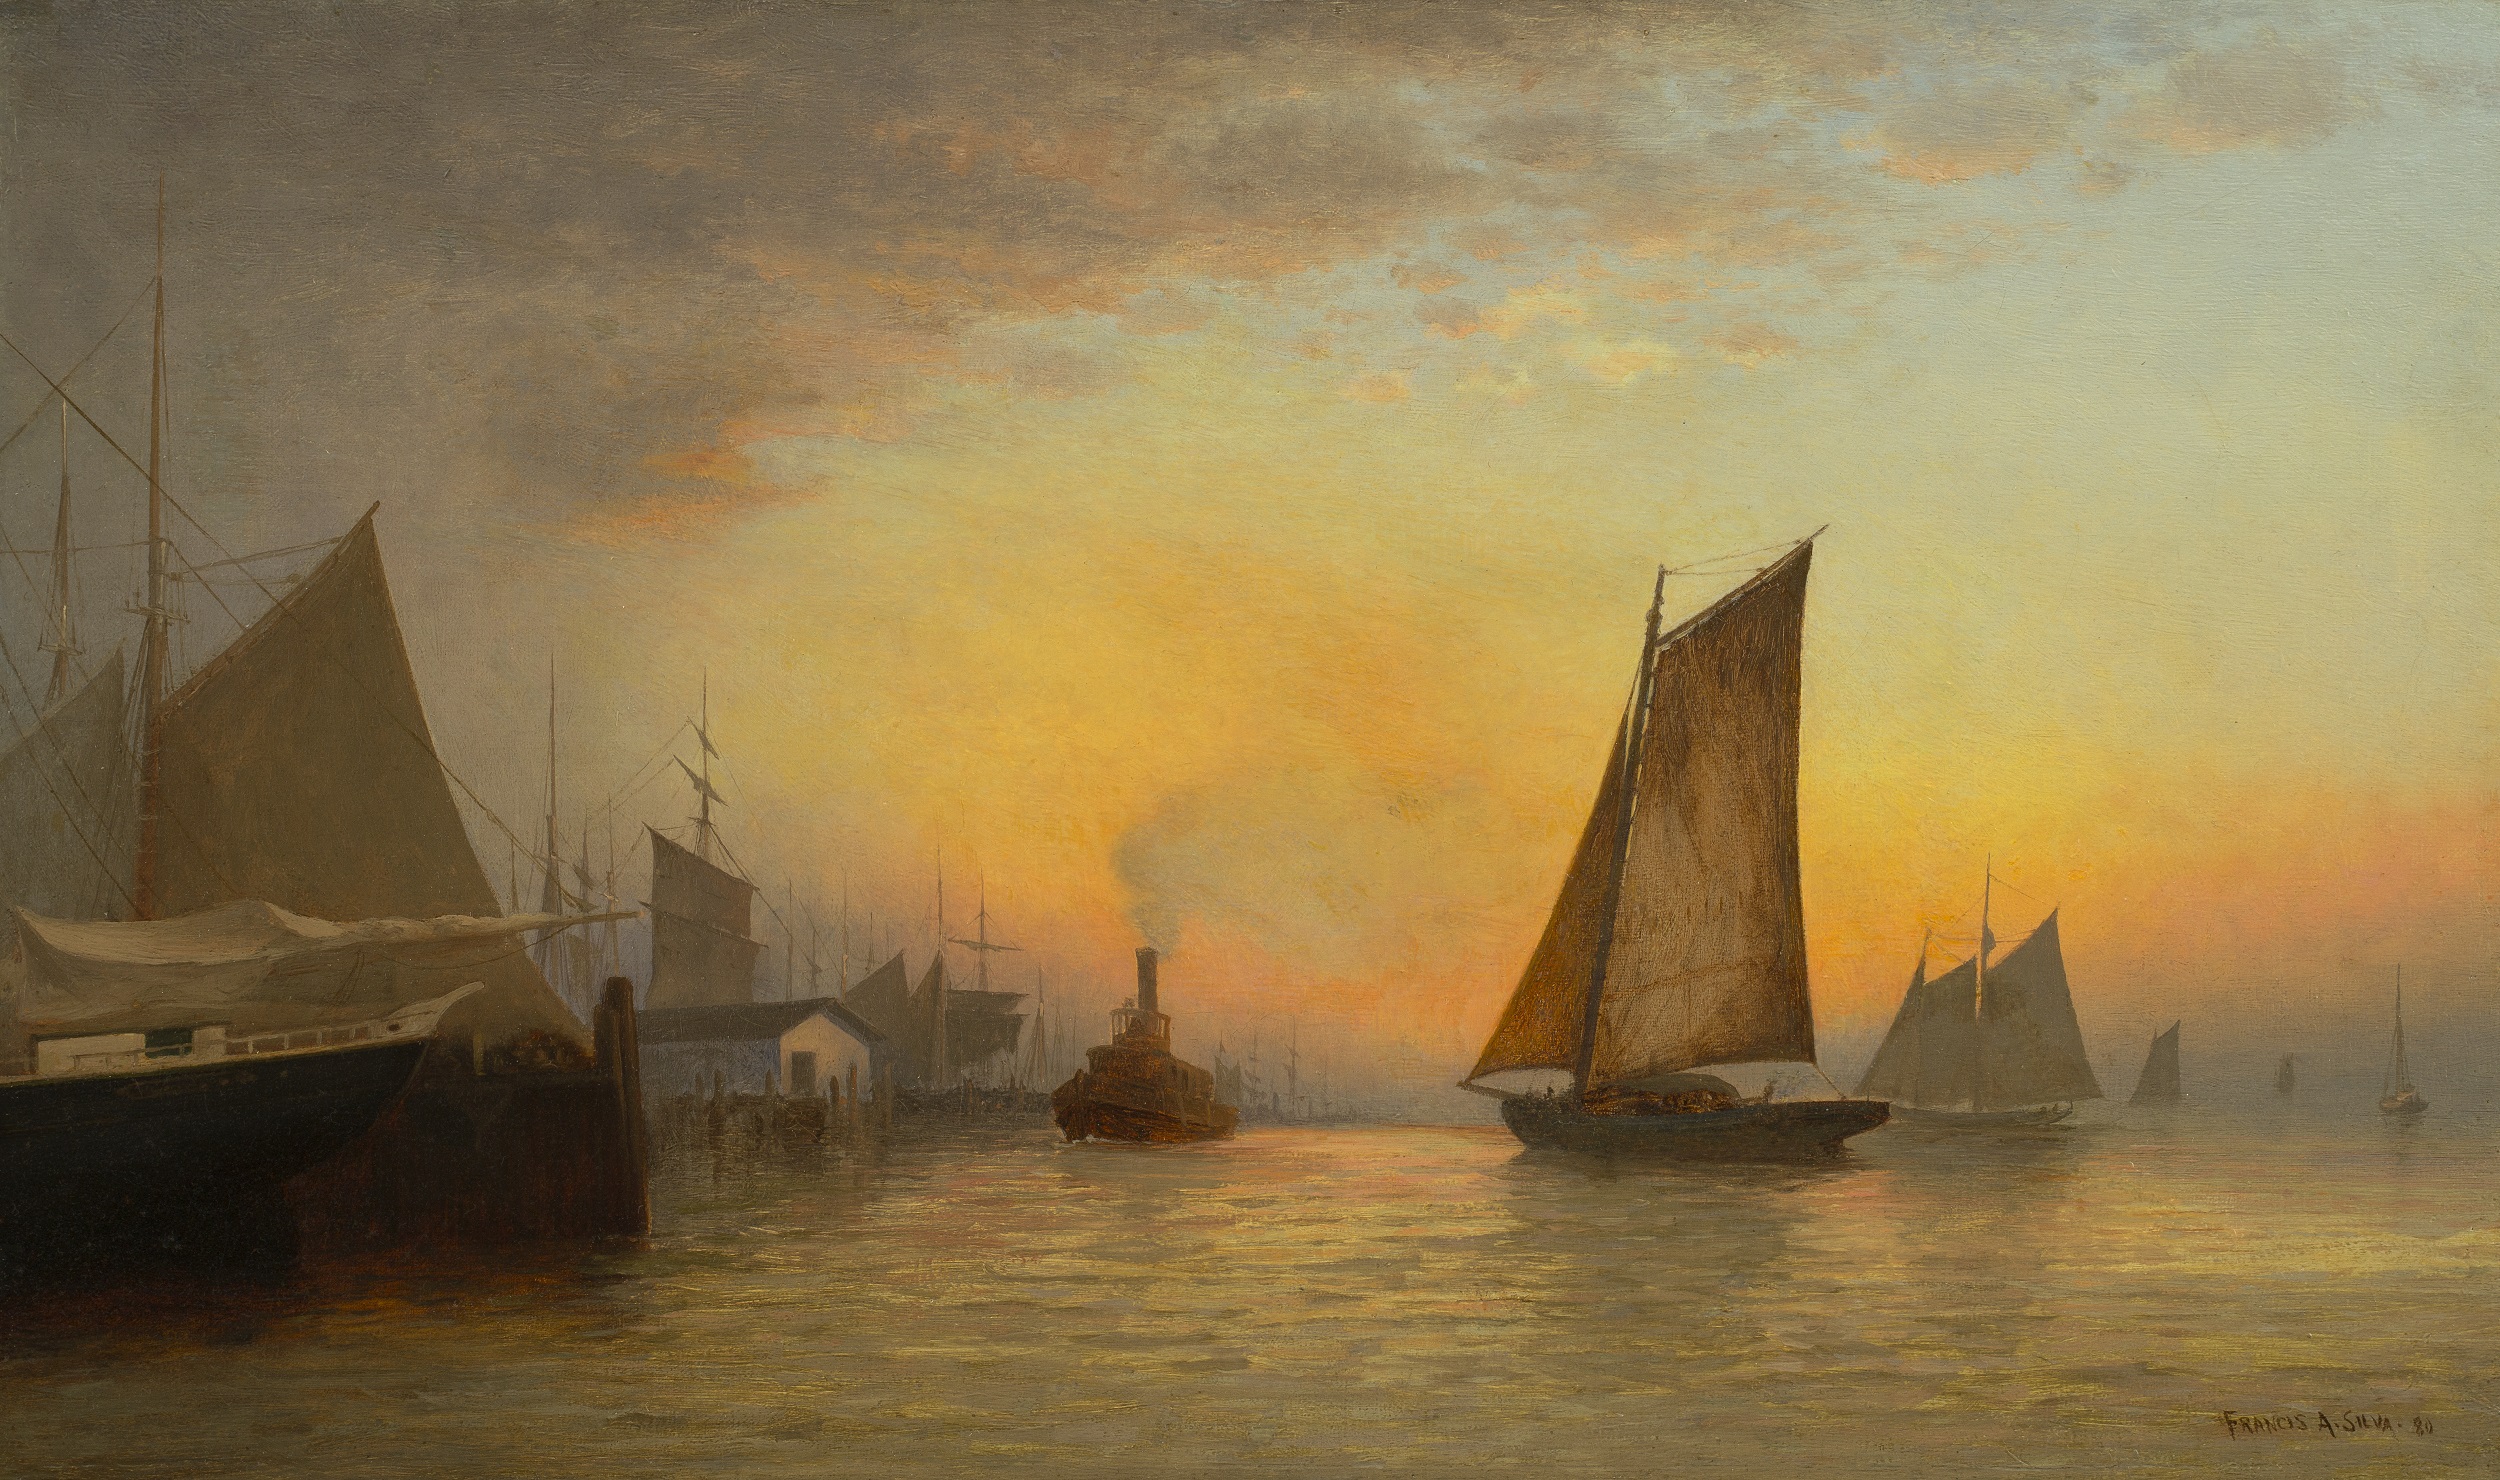 Oil painting of a harbor at sunset or sunrise, with several sailing ships and a steamboat with smoke coming out of its stack. The sky is a golden orange hue with a cloud formation to the left.